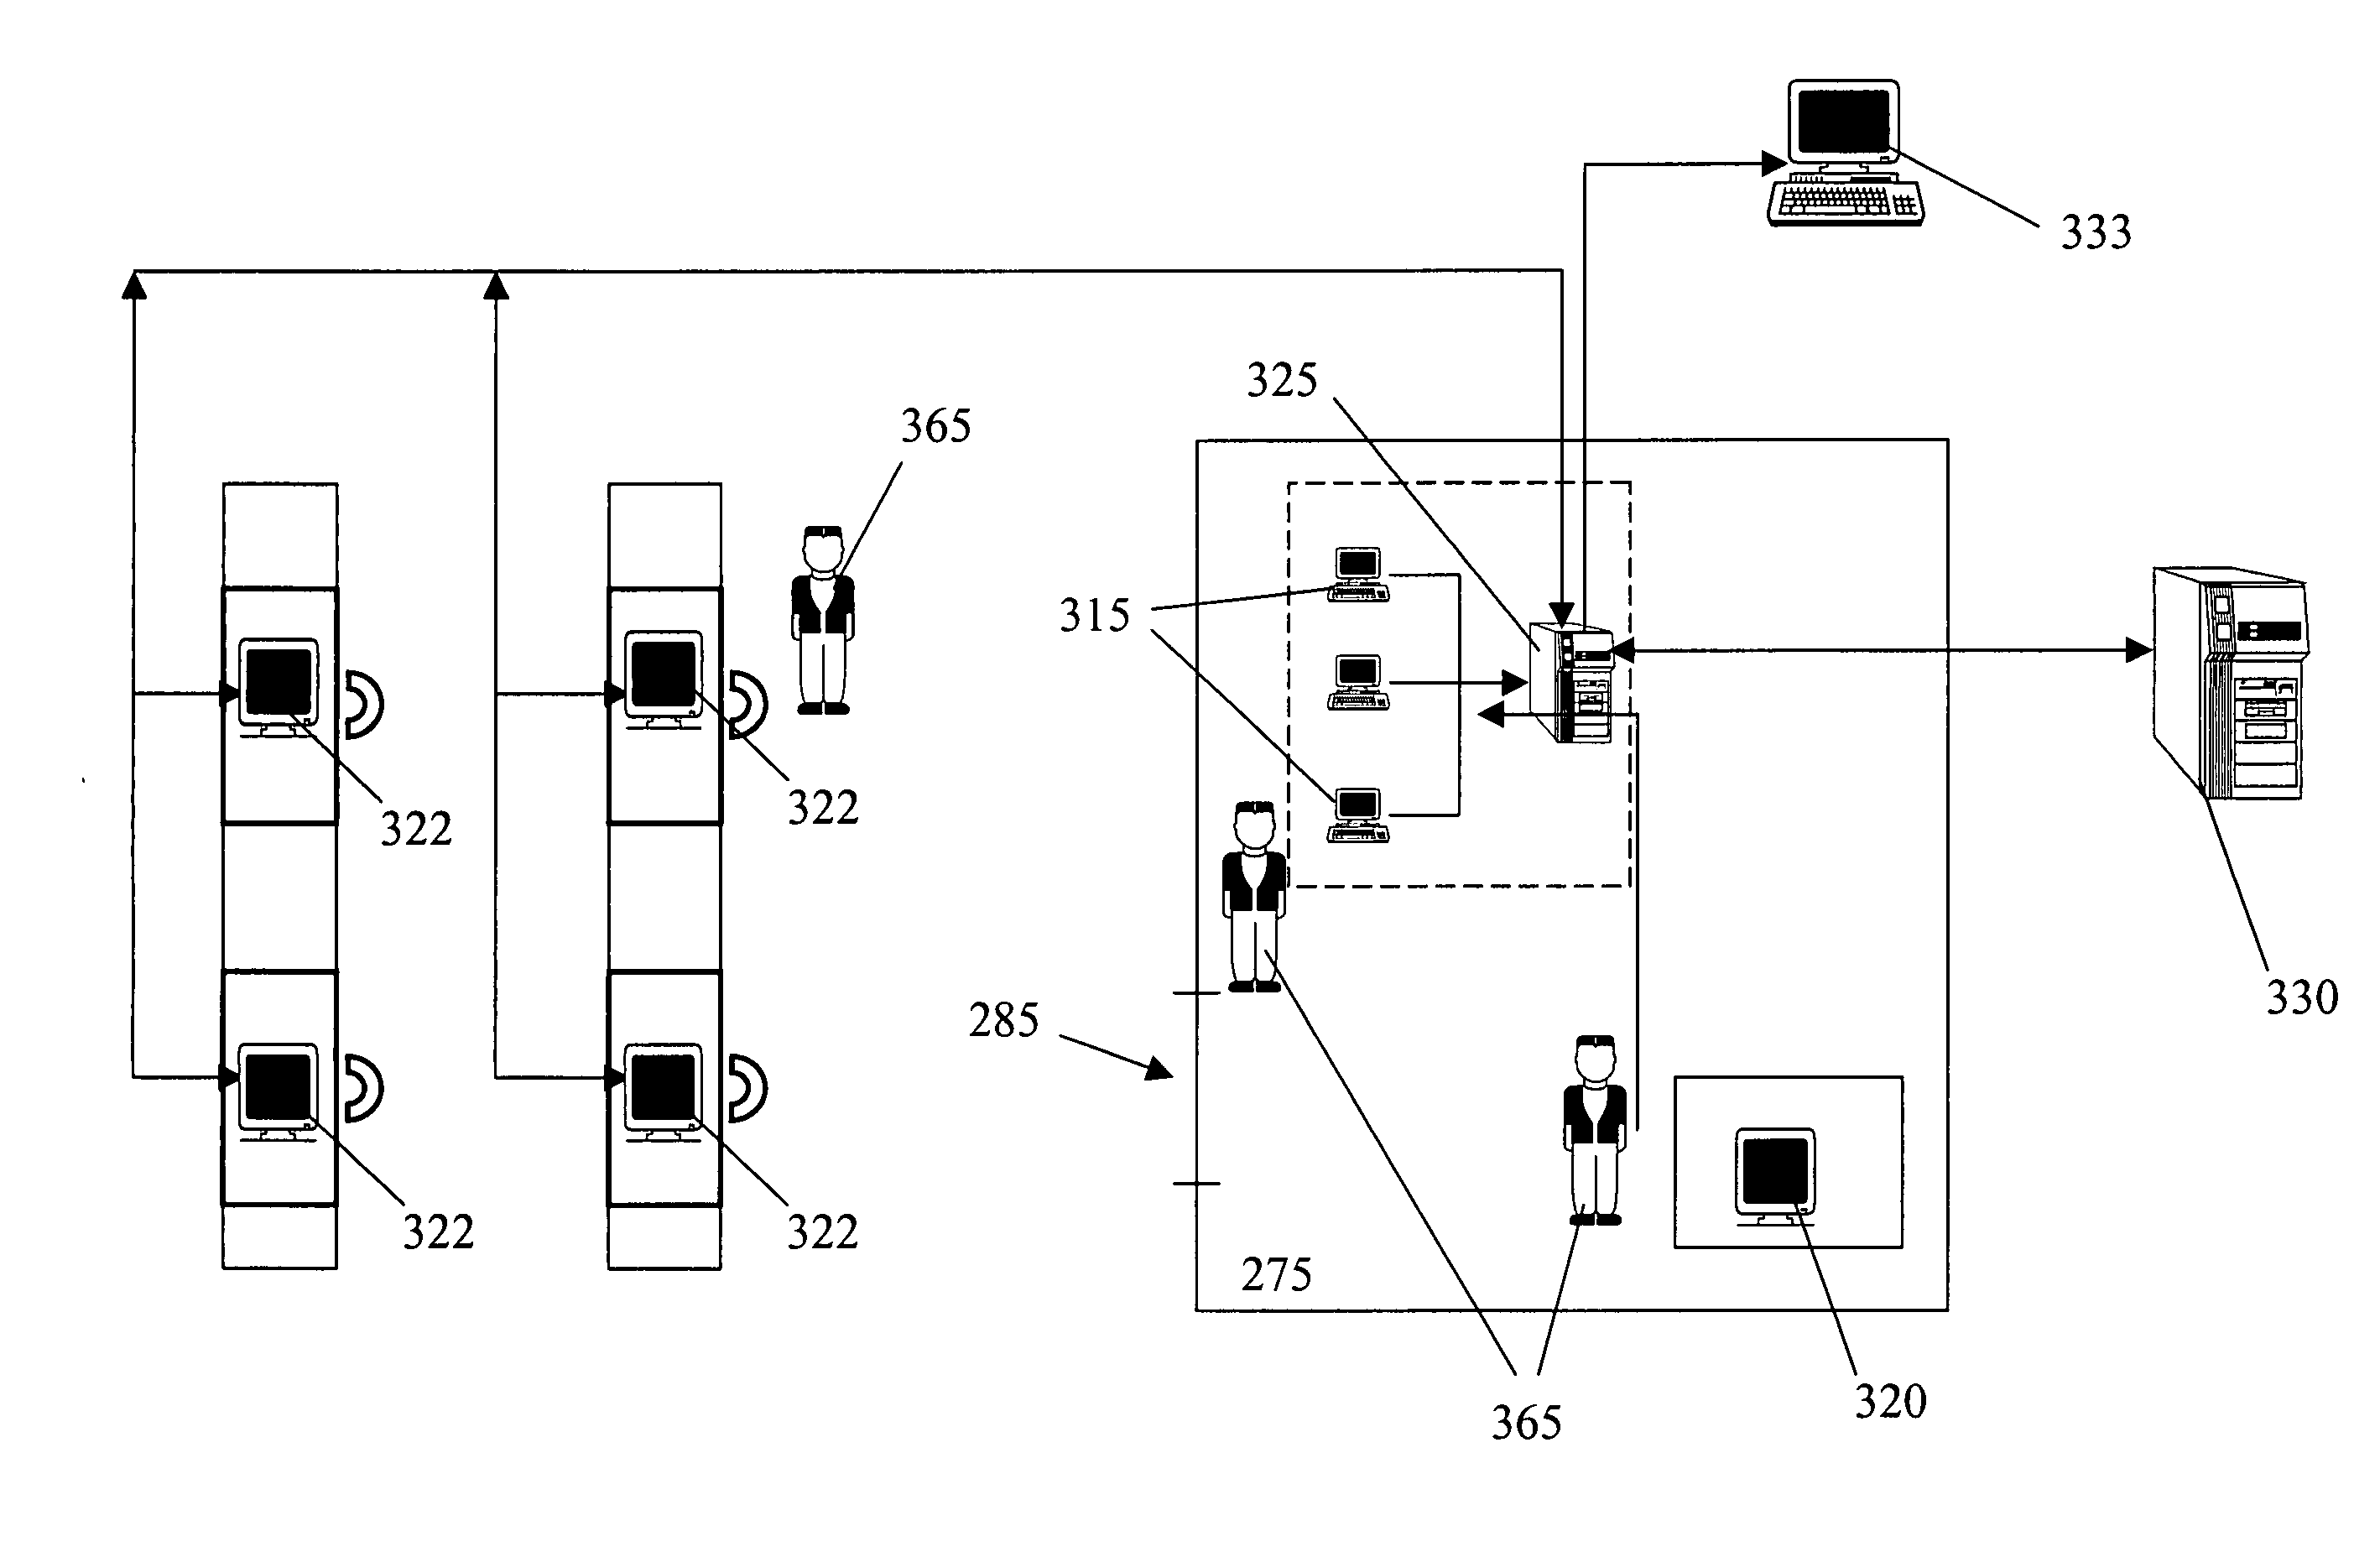 Lottery transaction device, system and method